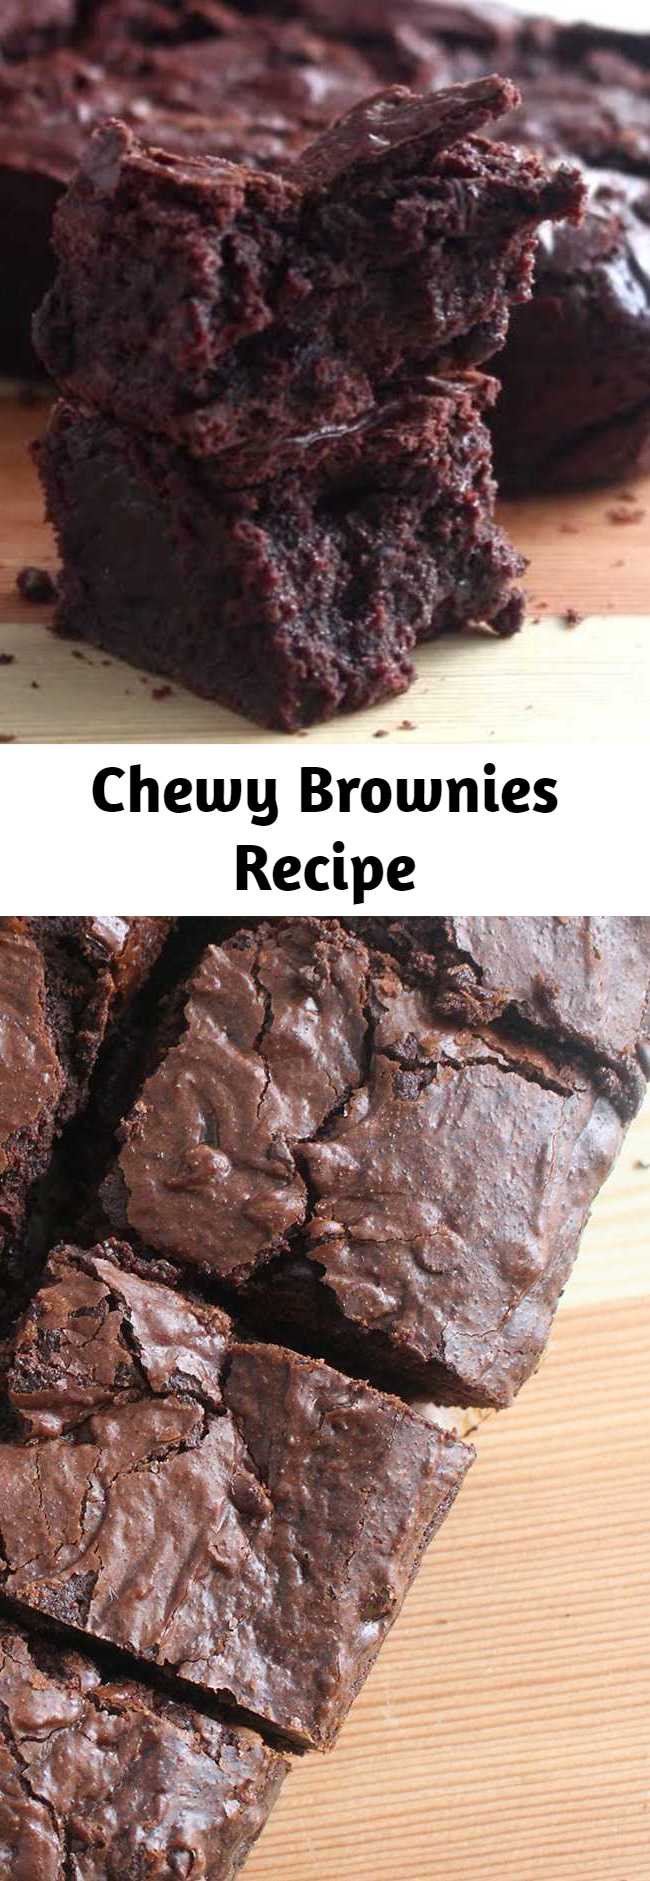 Chewy Brownies Recipe - These brownies are so chewy and moist and perfect for any chocolate craving! These are quite possibly the most chewy, moist brownies we've ever made.